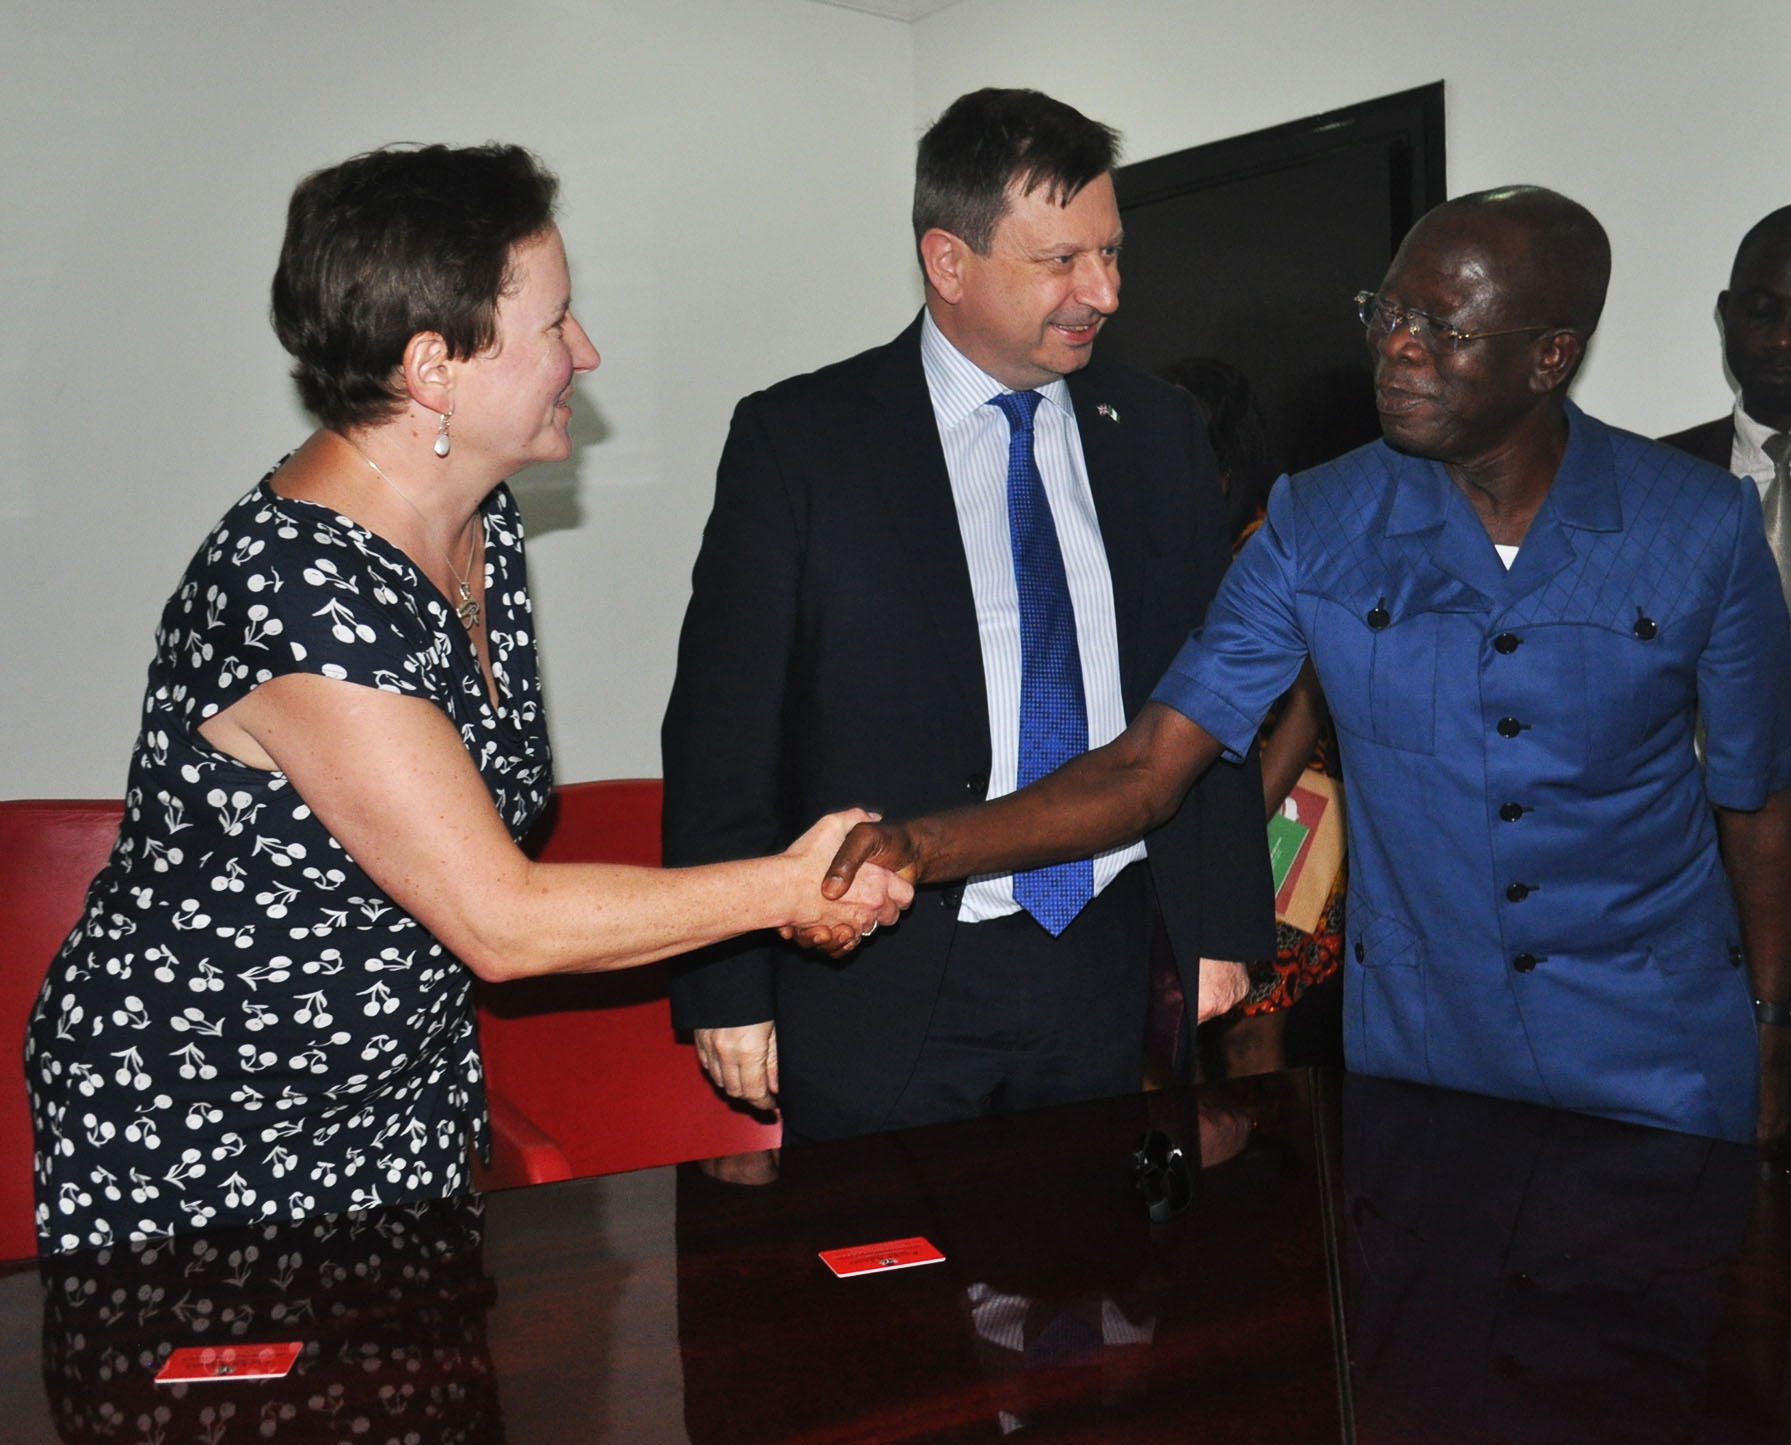 From right: Governor Adams Oshiomhole of Edo State, Mr Pau; Arkwright, British High Commissioner to Nigeria and his wife, Mrs Tricia Arkwright during a visit of the High Commissioner to Governor Oshiomhole in Benin City, Wednesday.